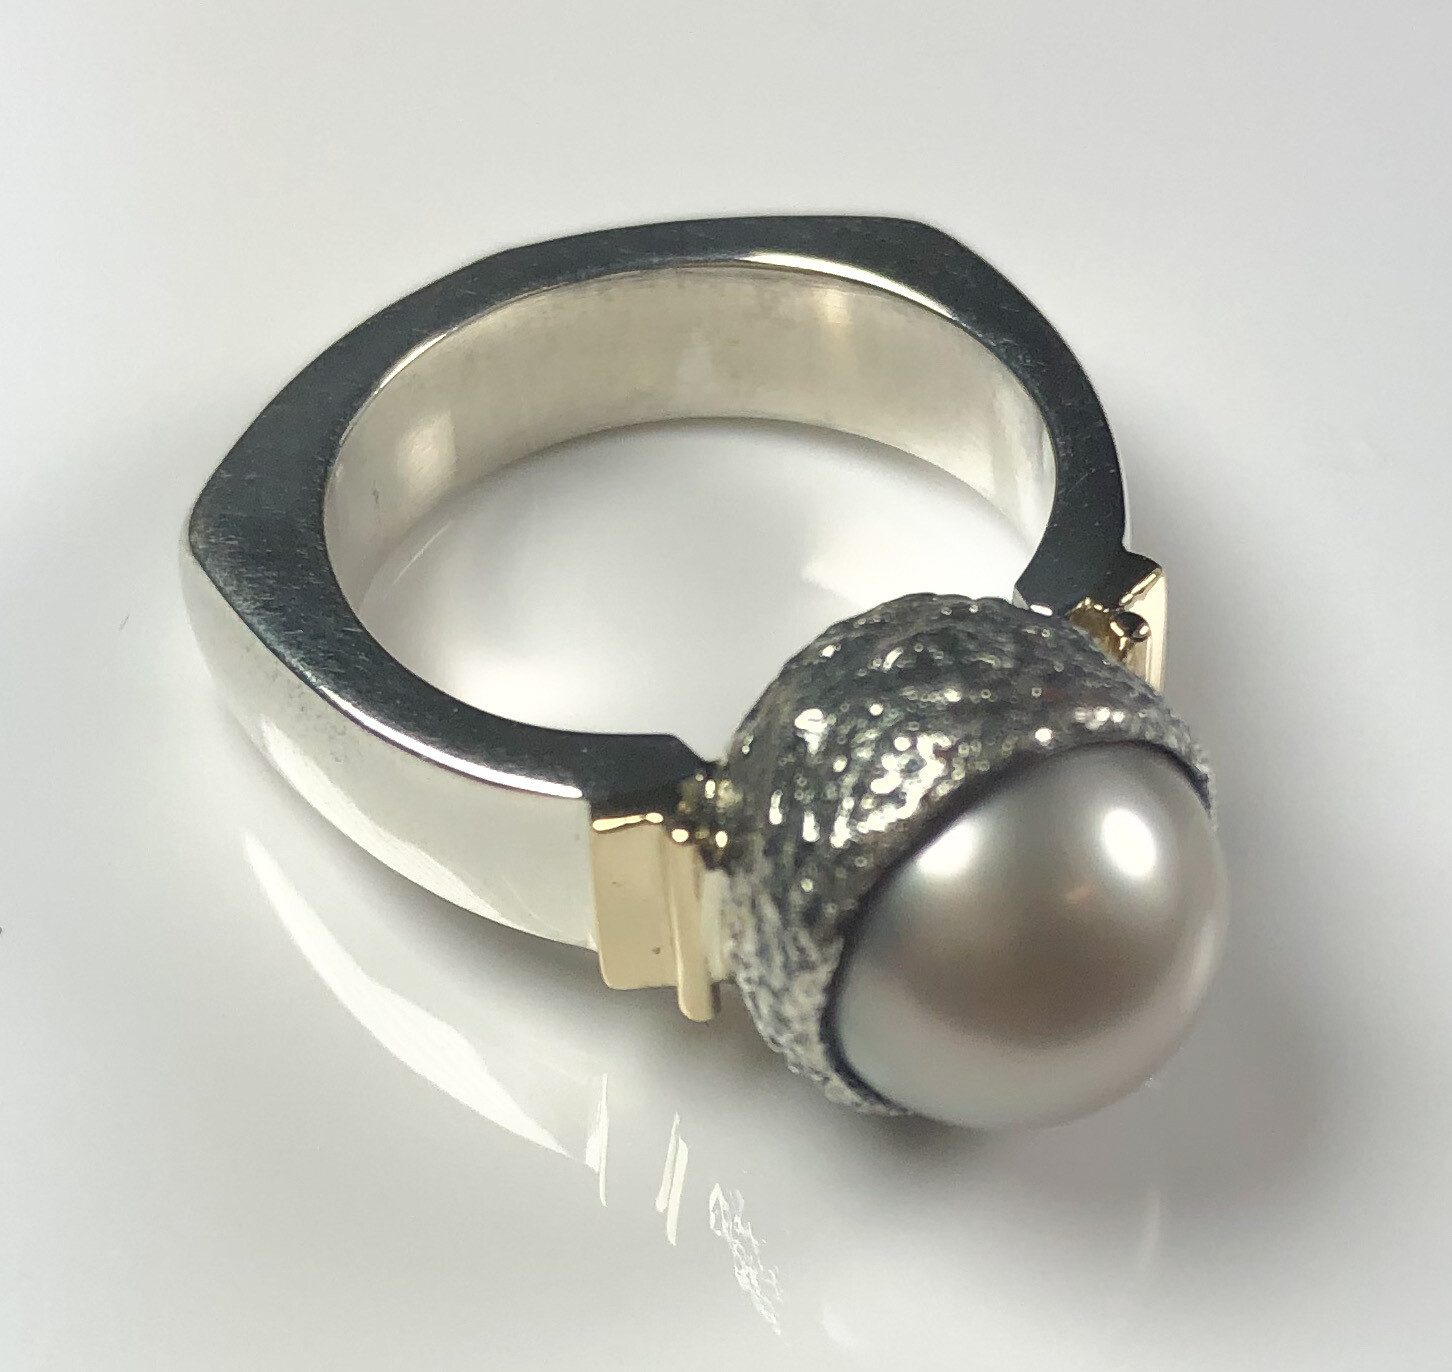 Cast acorn ring with Tahitian grey pearl, sterling silver & 14K yellow gold